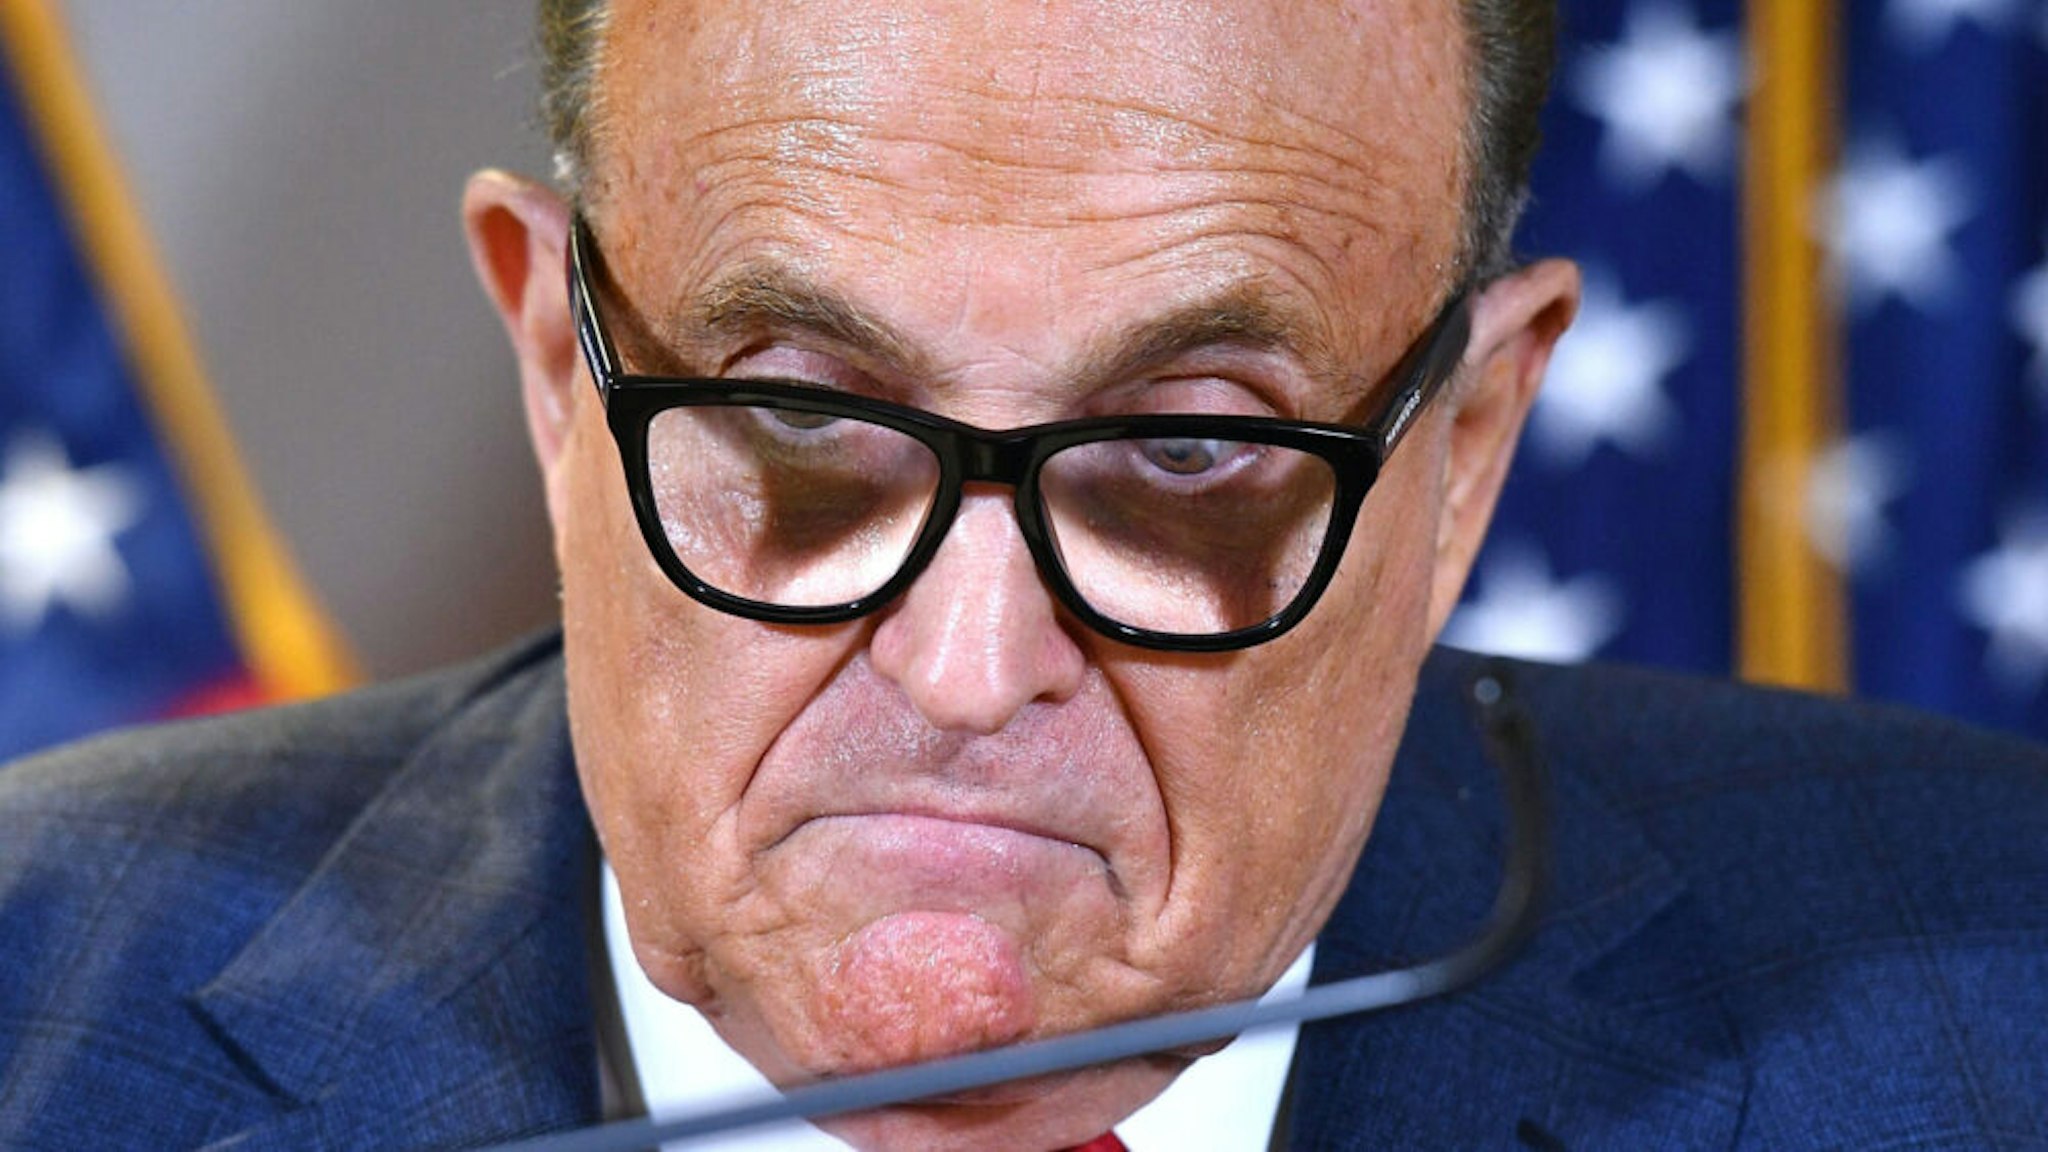 Trump's personal lawyer Rudy Giuliani speaks during a press conference at the Republican National Committee headquarters in Washington, DC, on November 19, 2020.